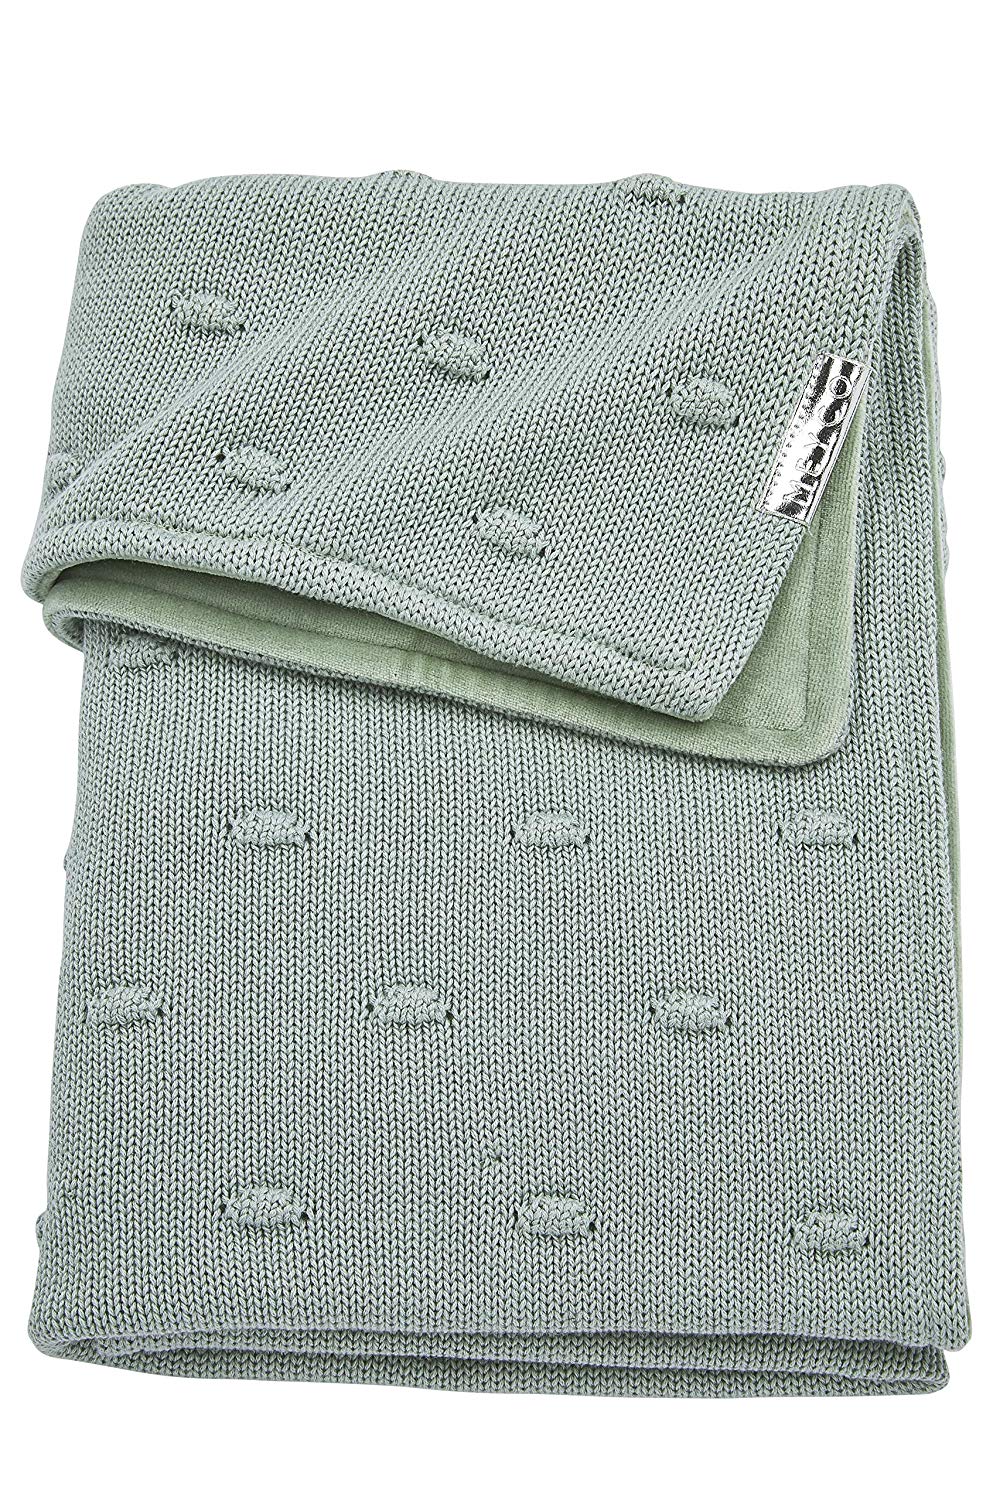 Meyco 2754053 Winter Knitted Blanket with Velour and Knot 100 x 150 cm Stone Green